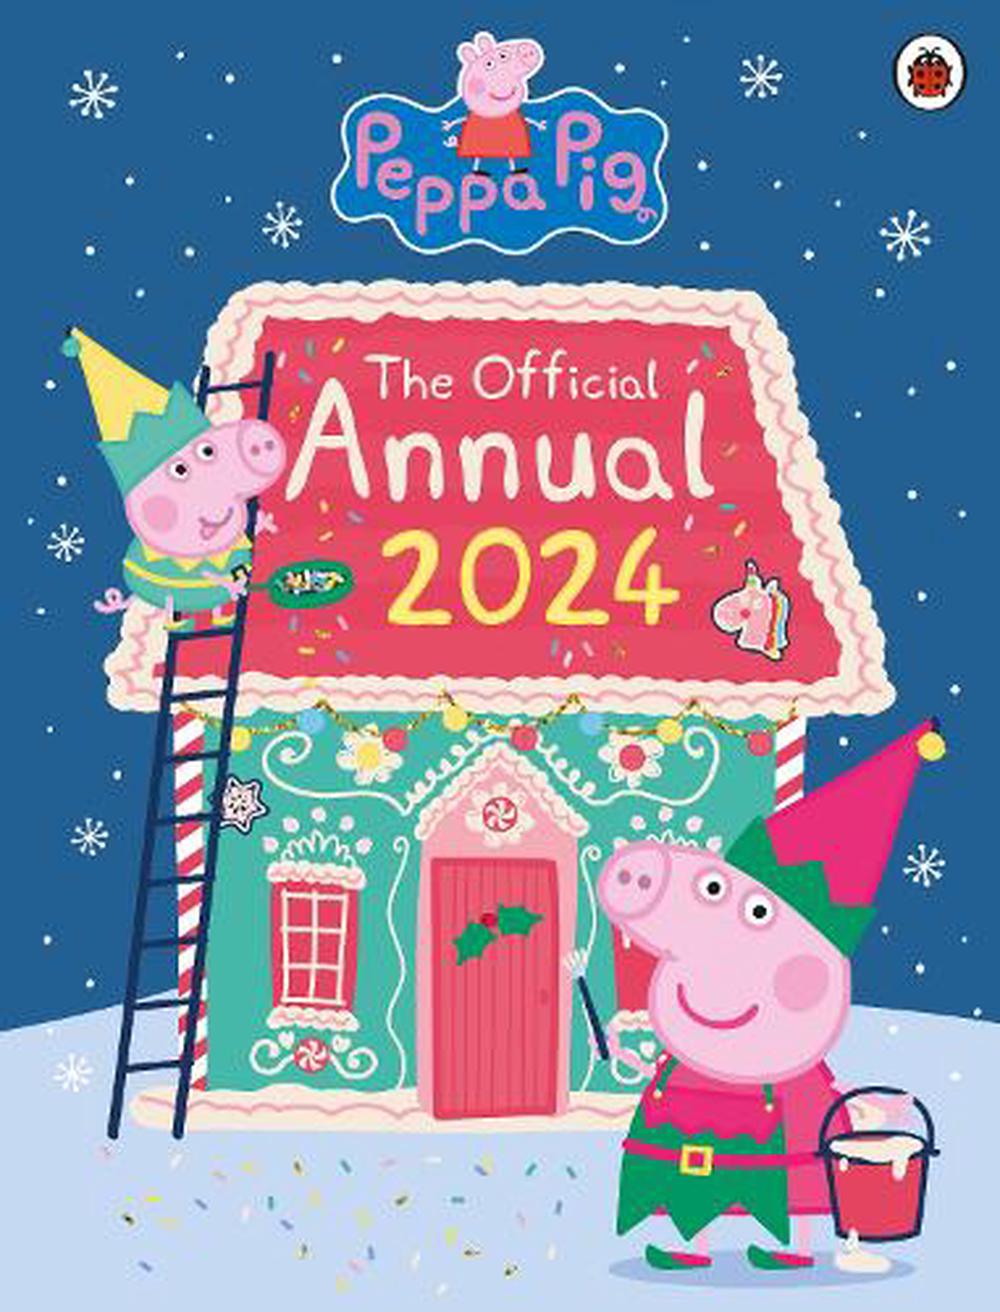 Peppa Pig The Official Annual 2024 by Peppa Pig, Hardcover